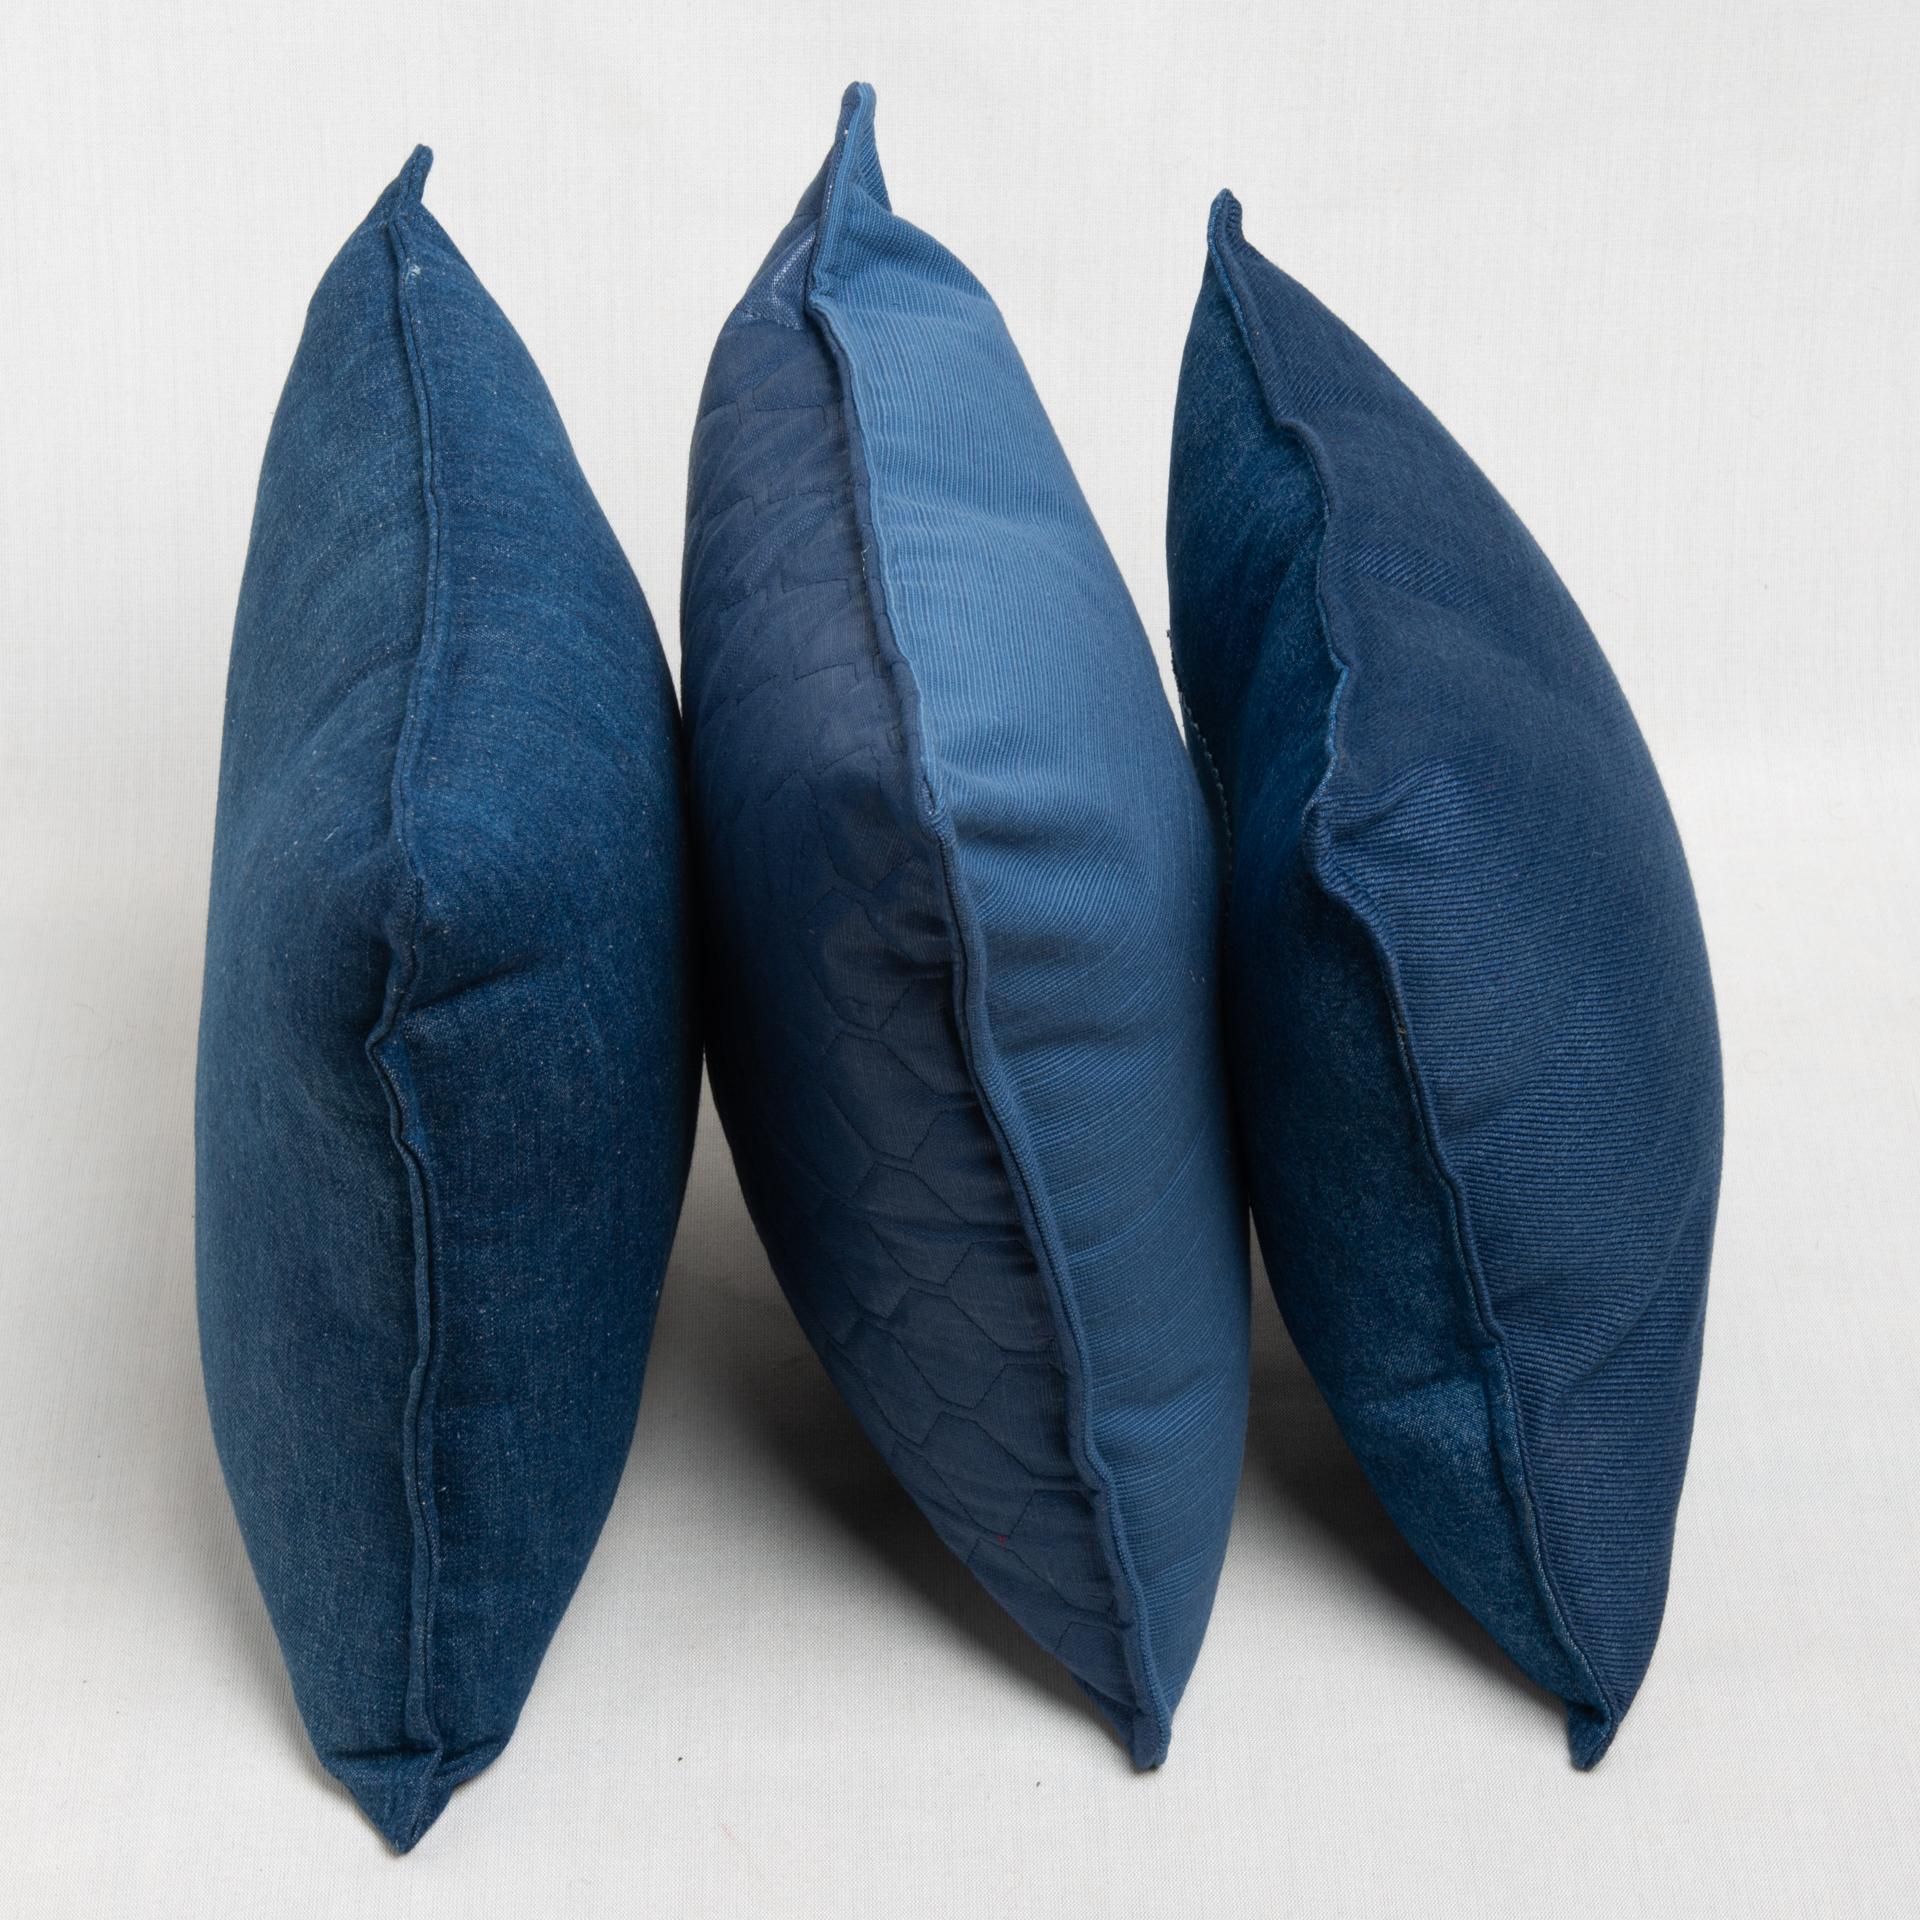 Other Three Casual Pillows in Old Denim Fabric For Sale